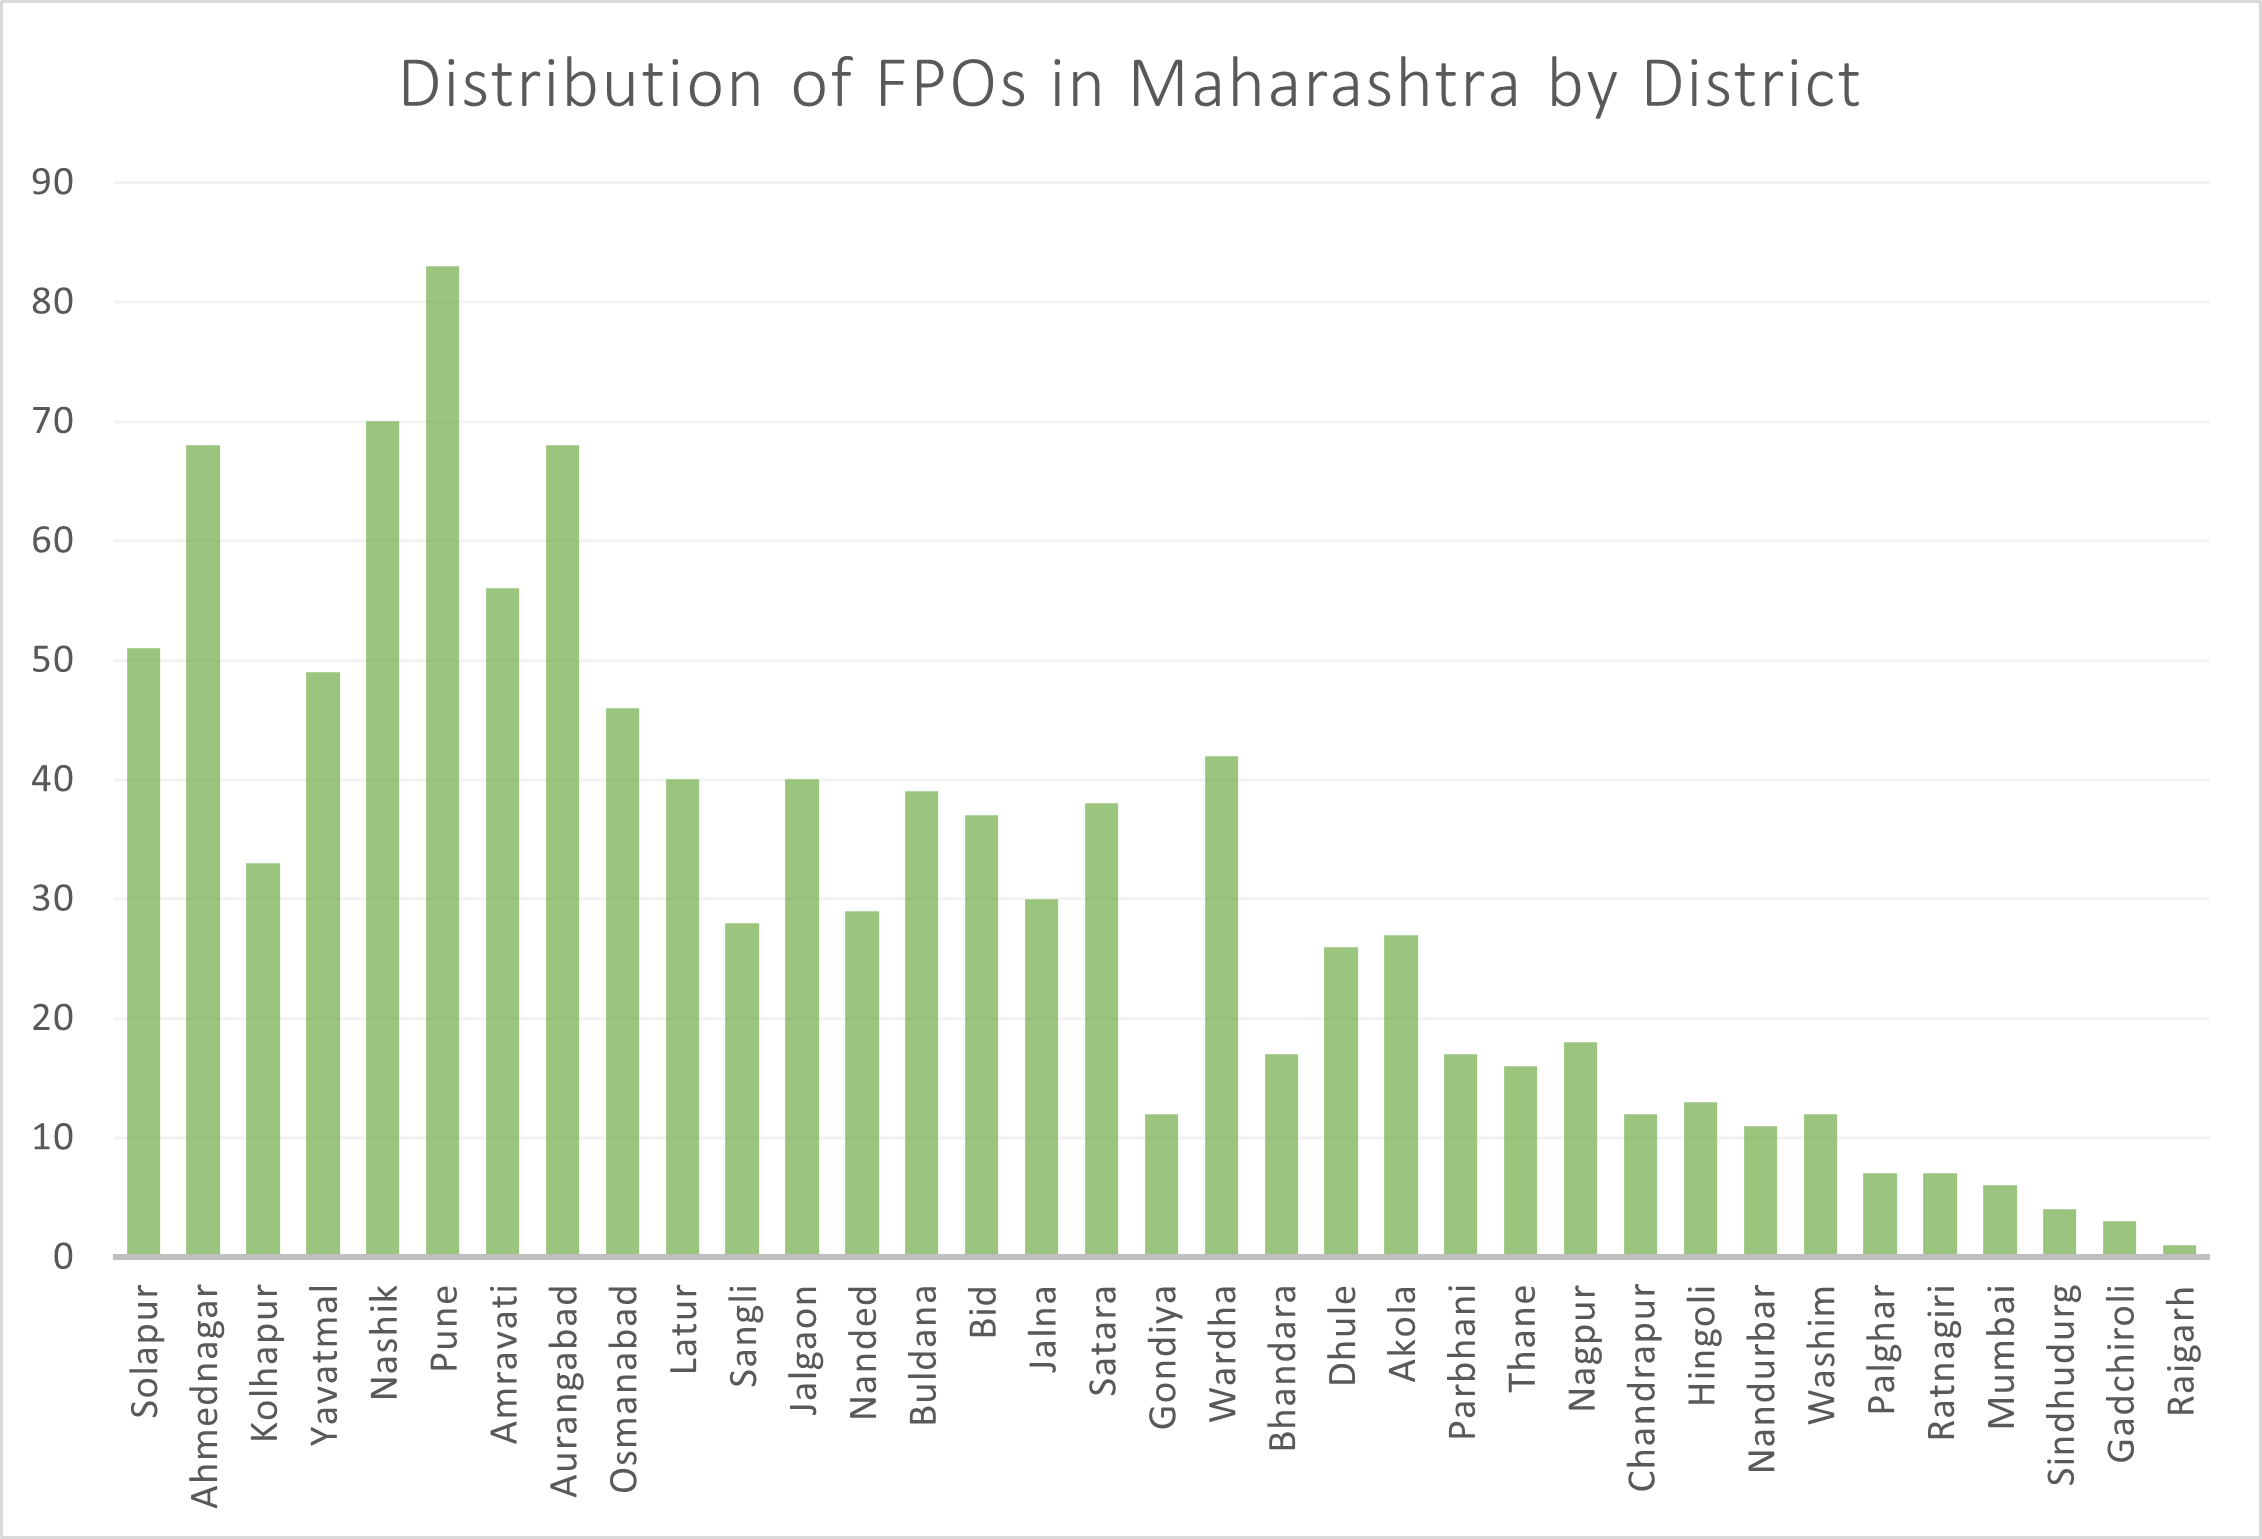 Distribtion of FPOs in Maharashtra by district